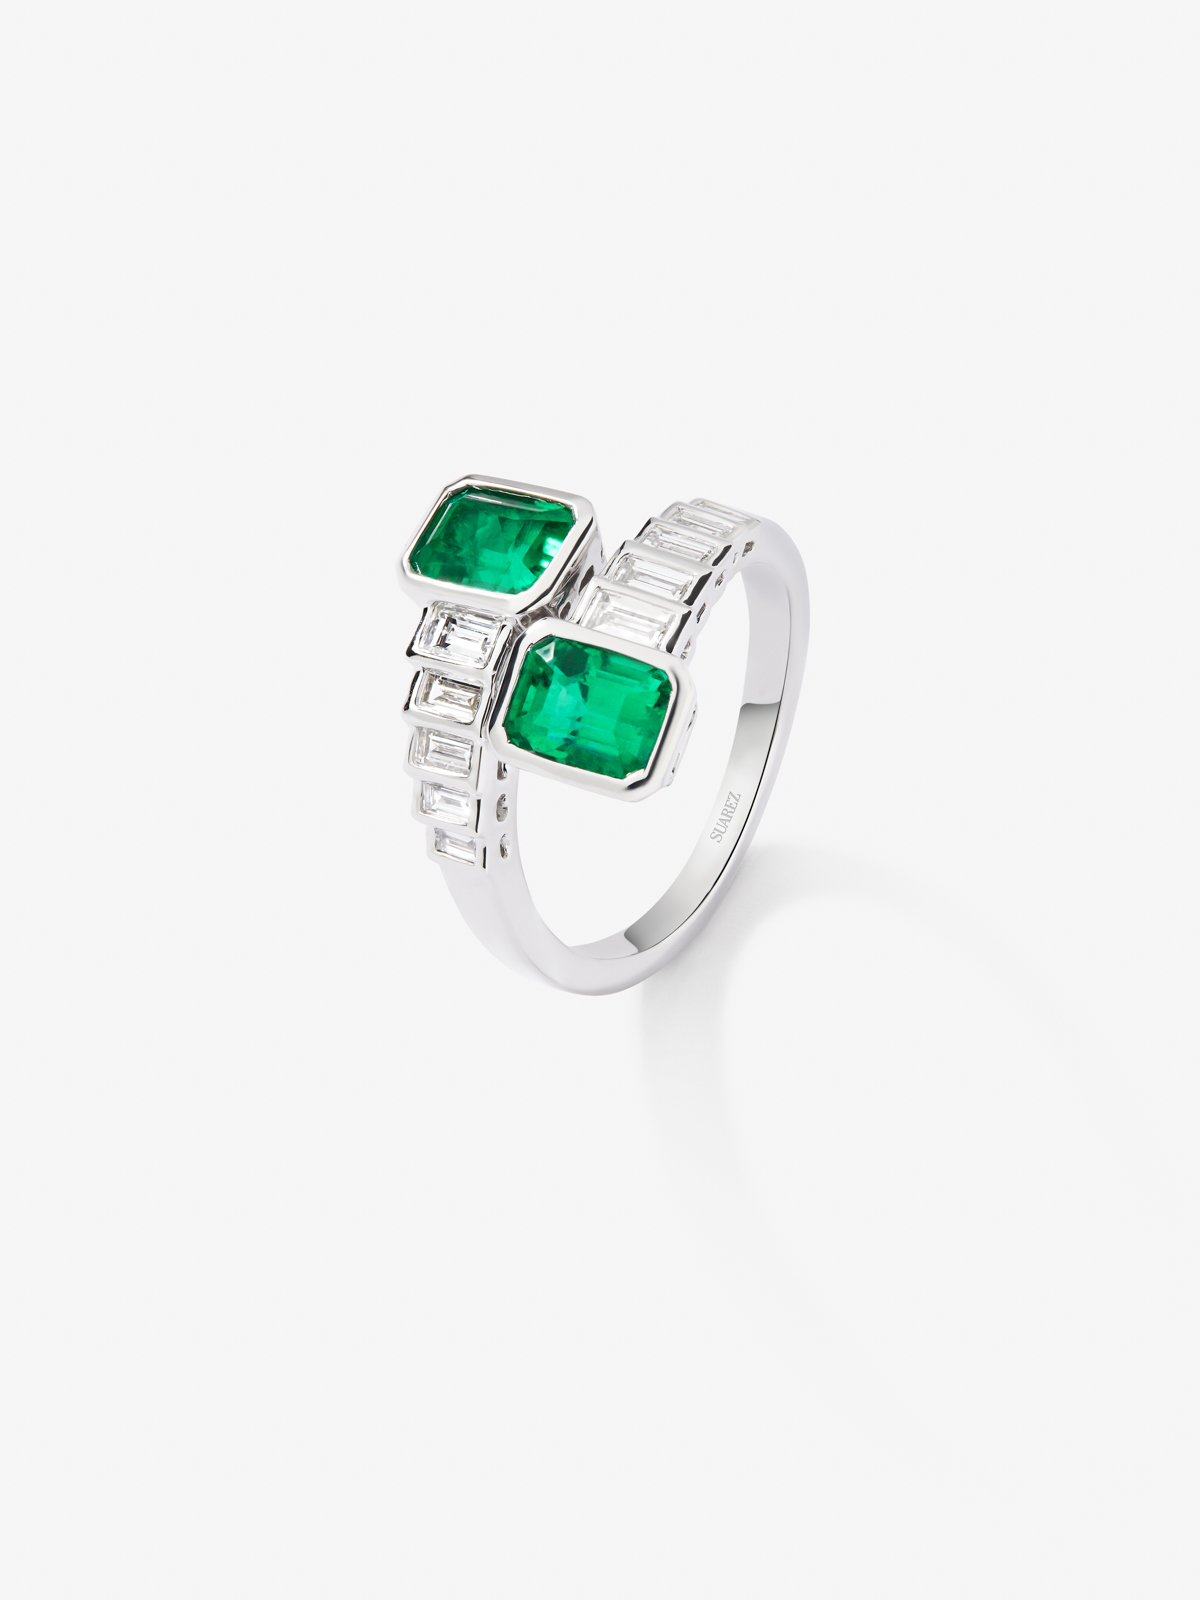 You and I 18k White Gold Ring with Green Emeralds in Octagonal Size 1.83 cts and White Diamonds in 0.57 CTS baggos